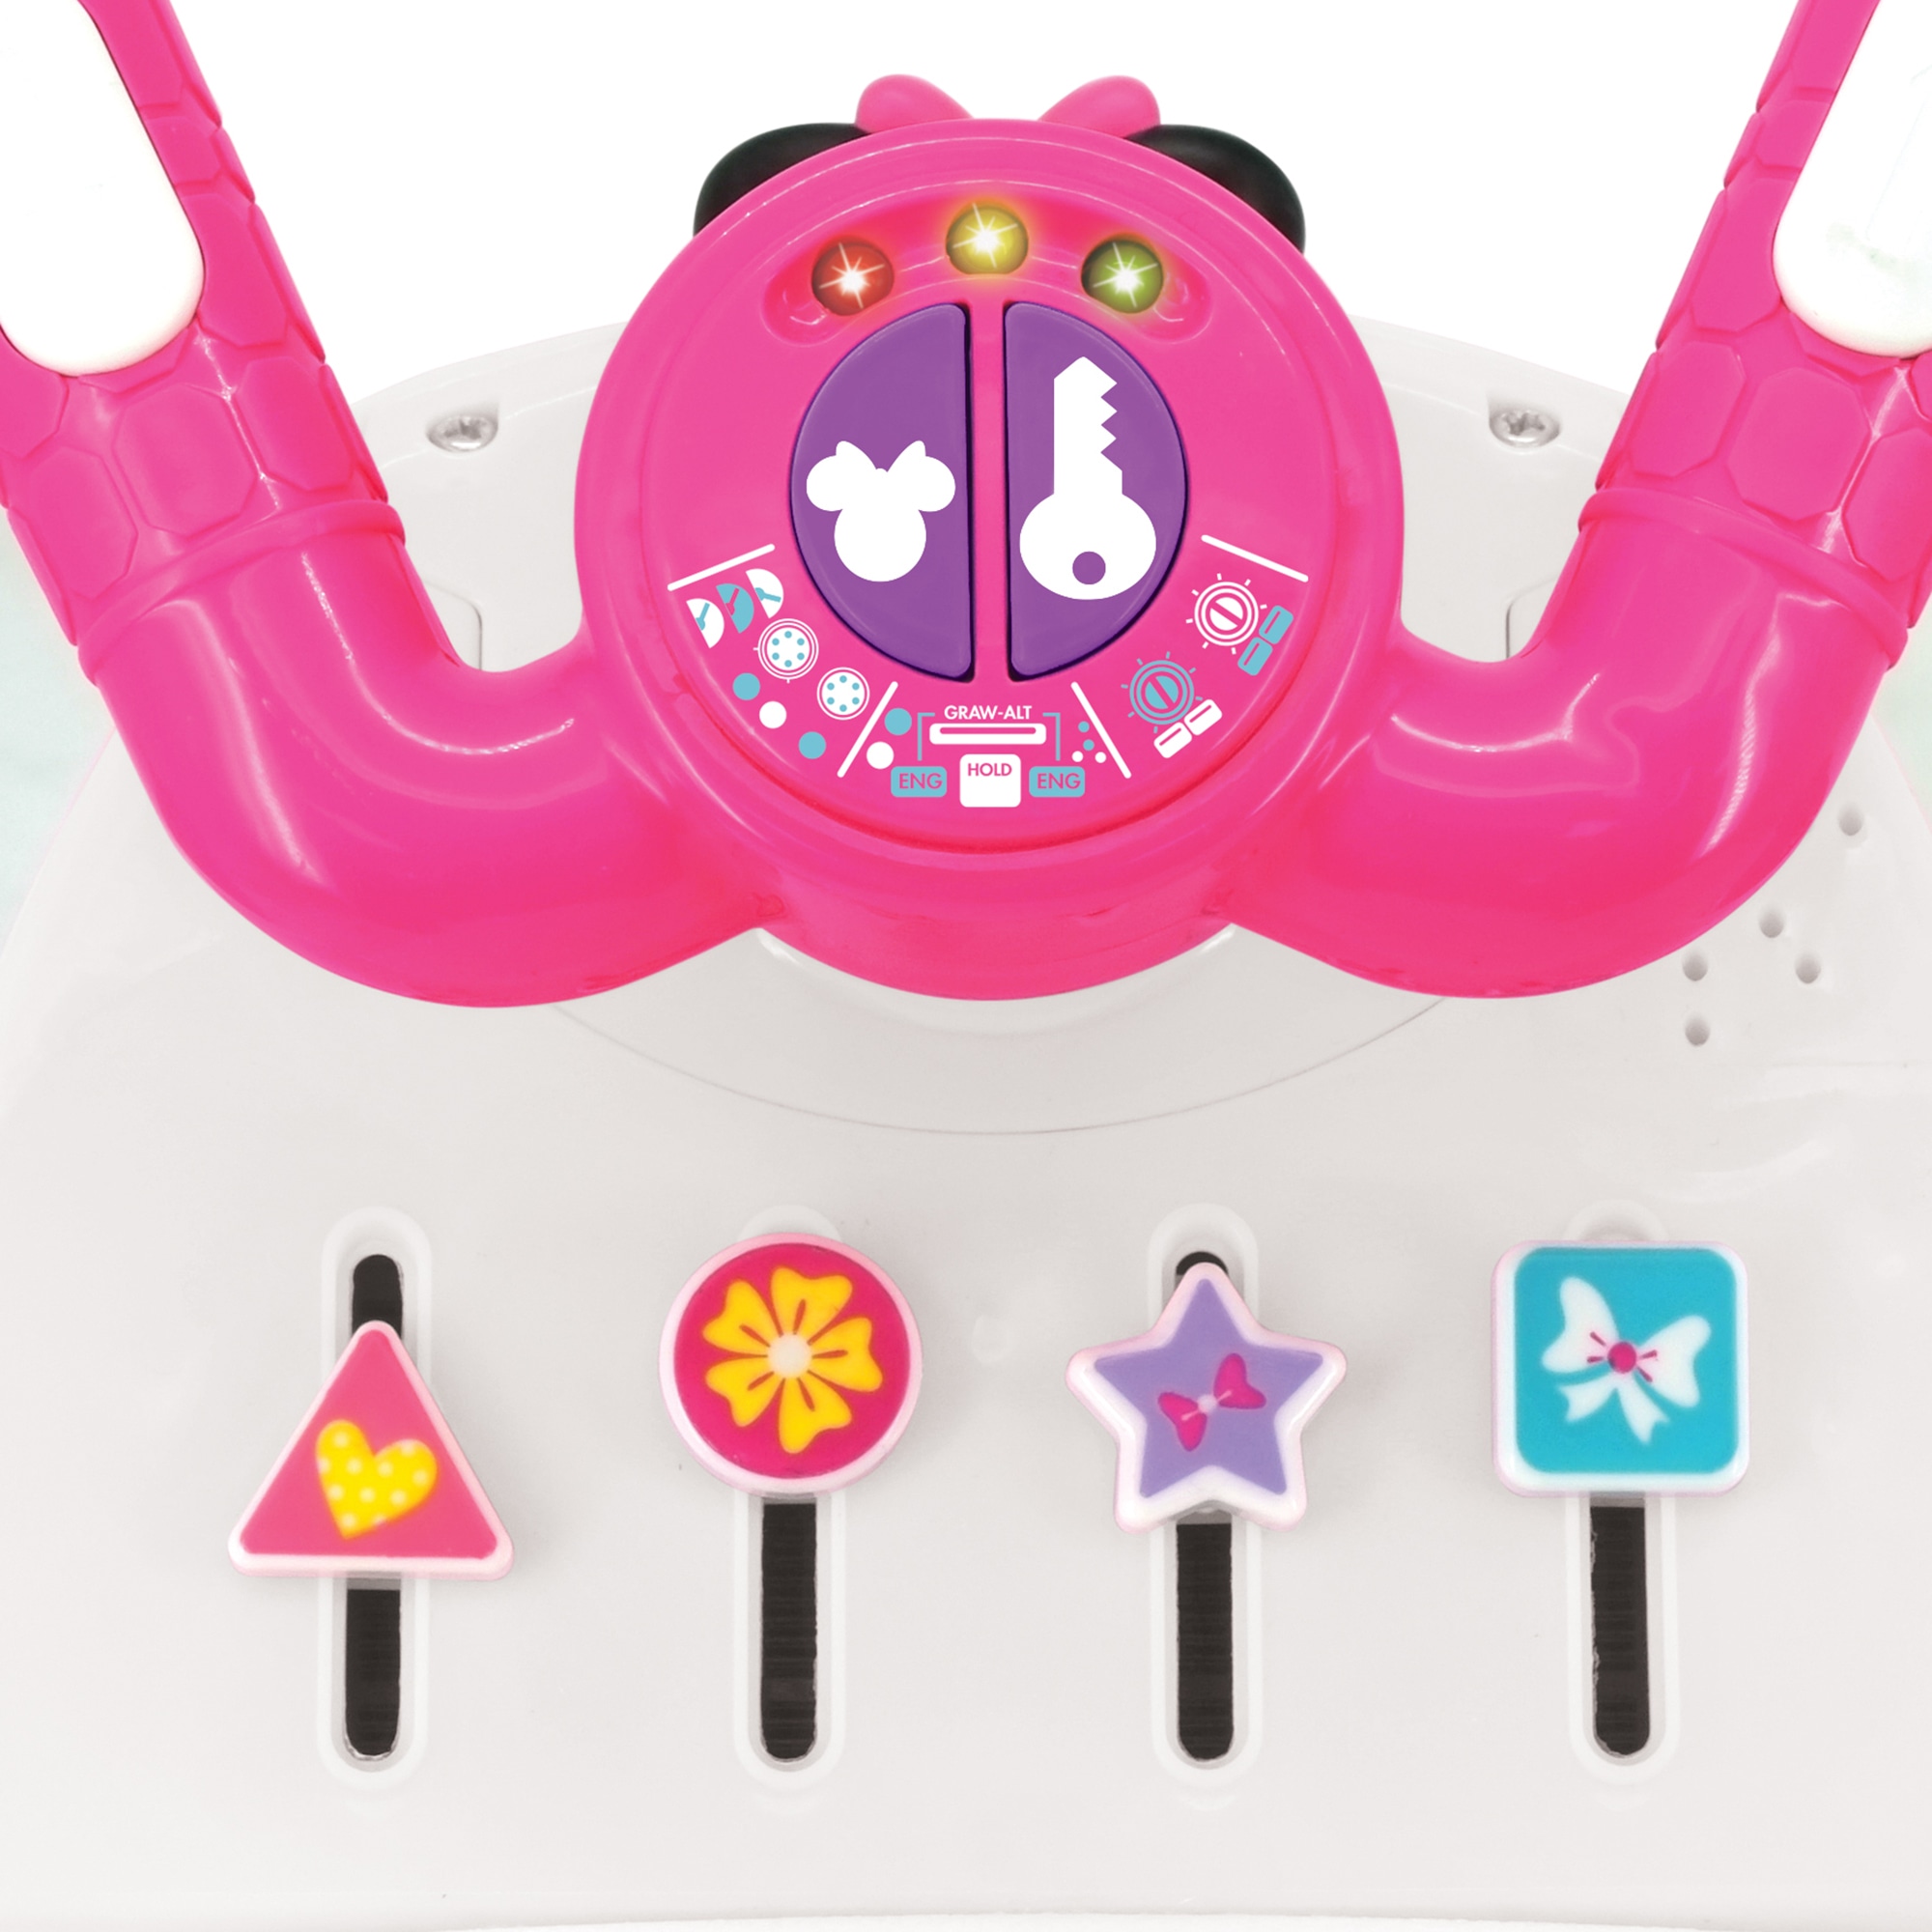 Kiddieland Disney Animated Lights: Minnie Mouse Activity Plane Kids Interactive Push Toy Car, Foot To Floor, Toddlers, Ages 12-36 Months - image 2 of 5